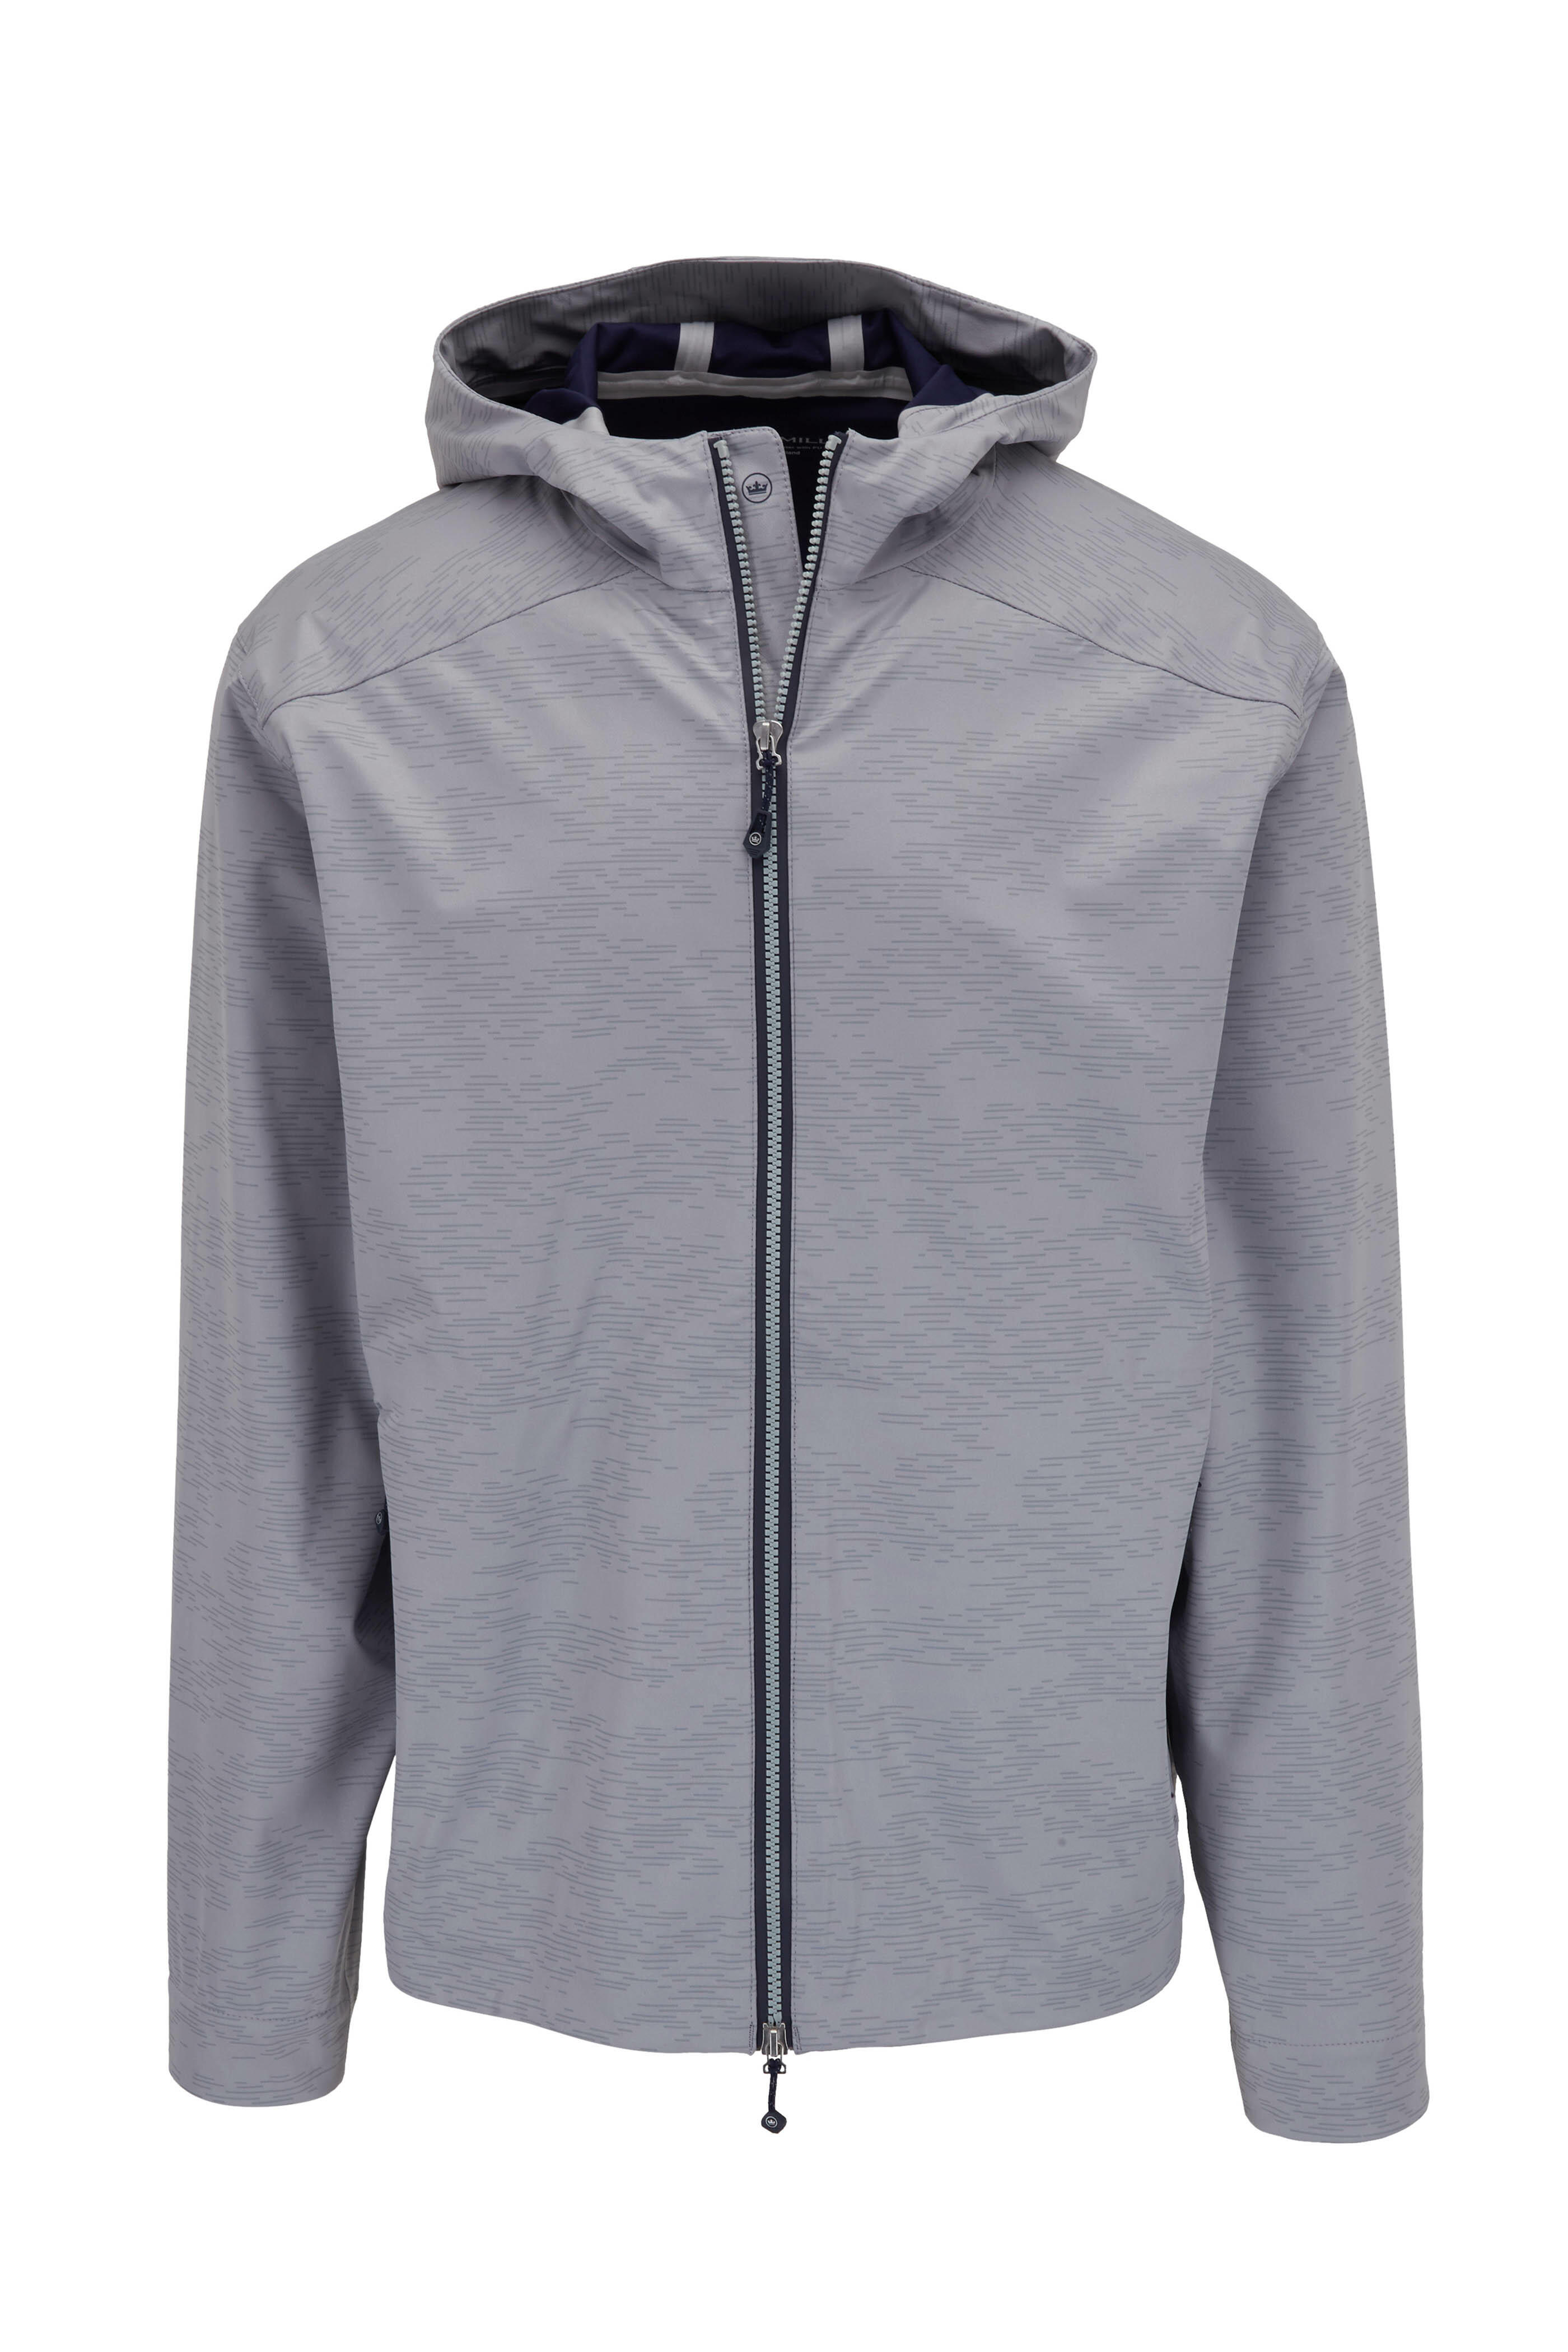 N-S Spark Full Sleeve Mens Grey Hooded Jacket, Size: M To Xxl at